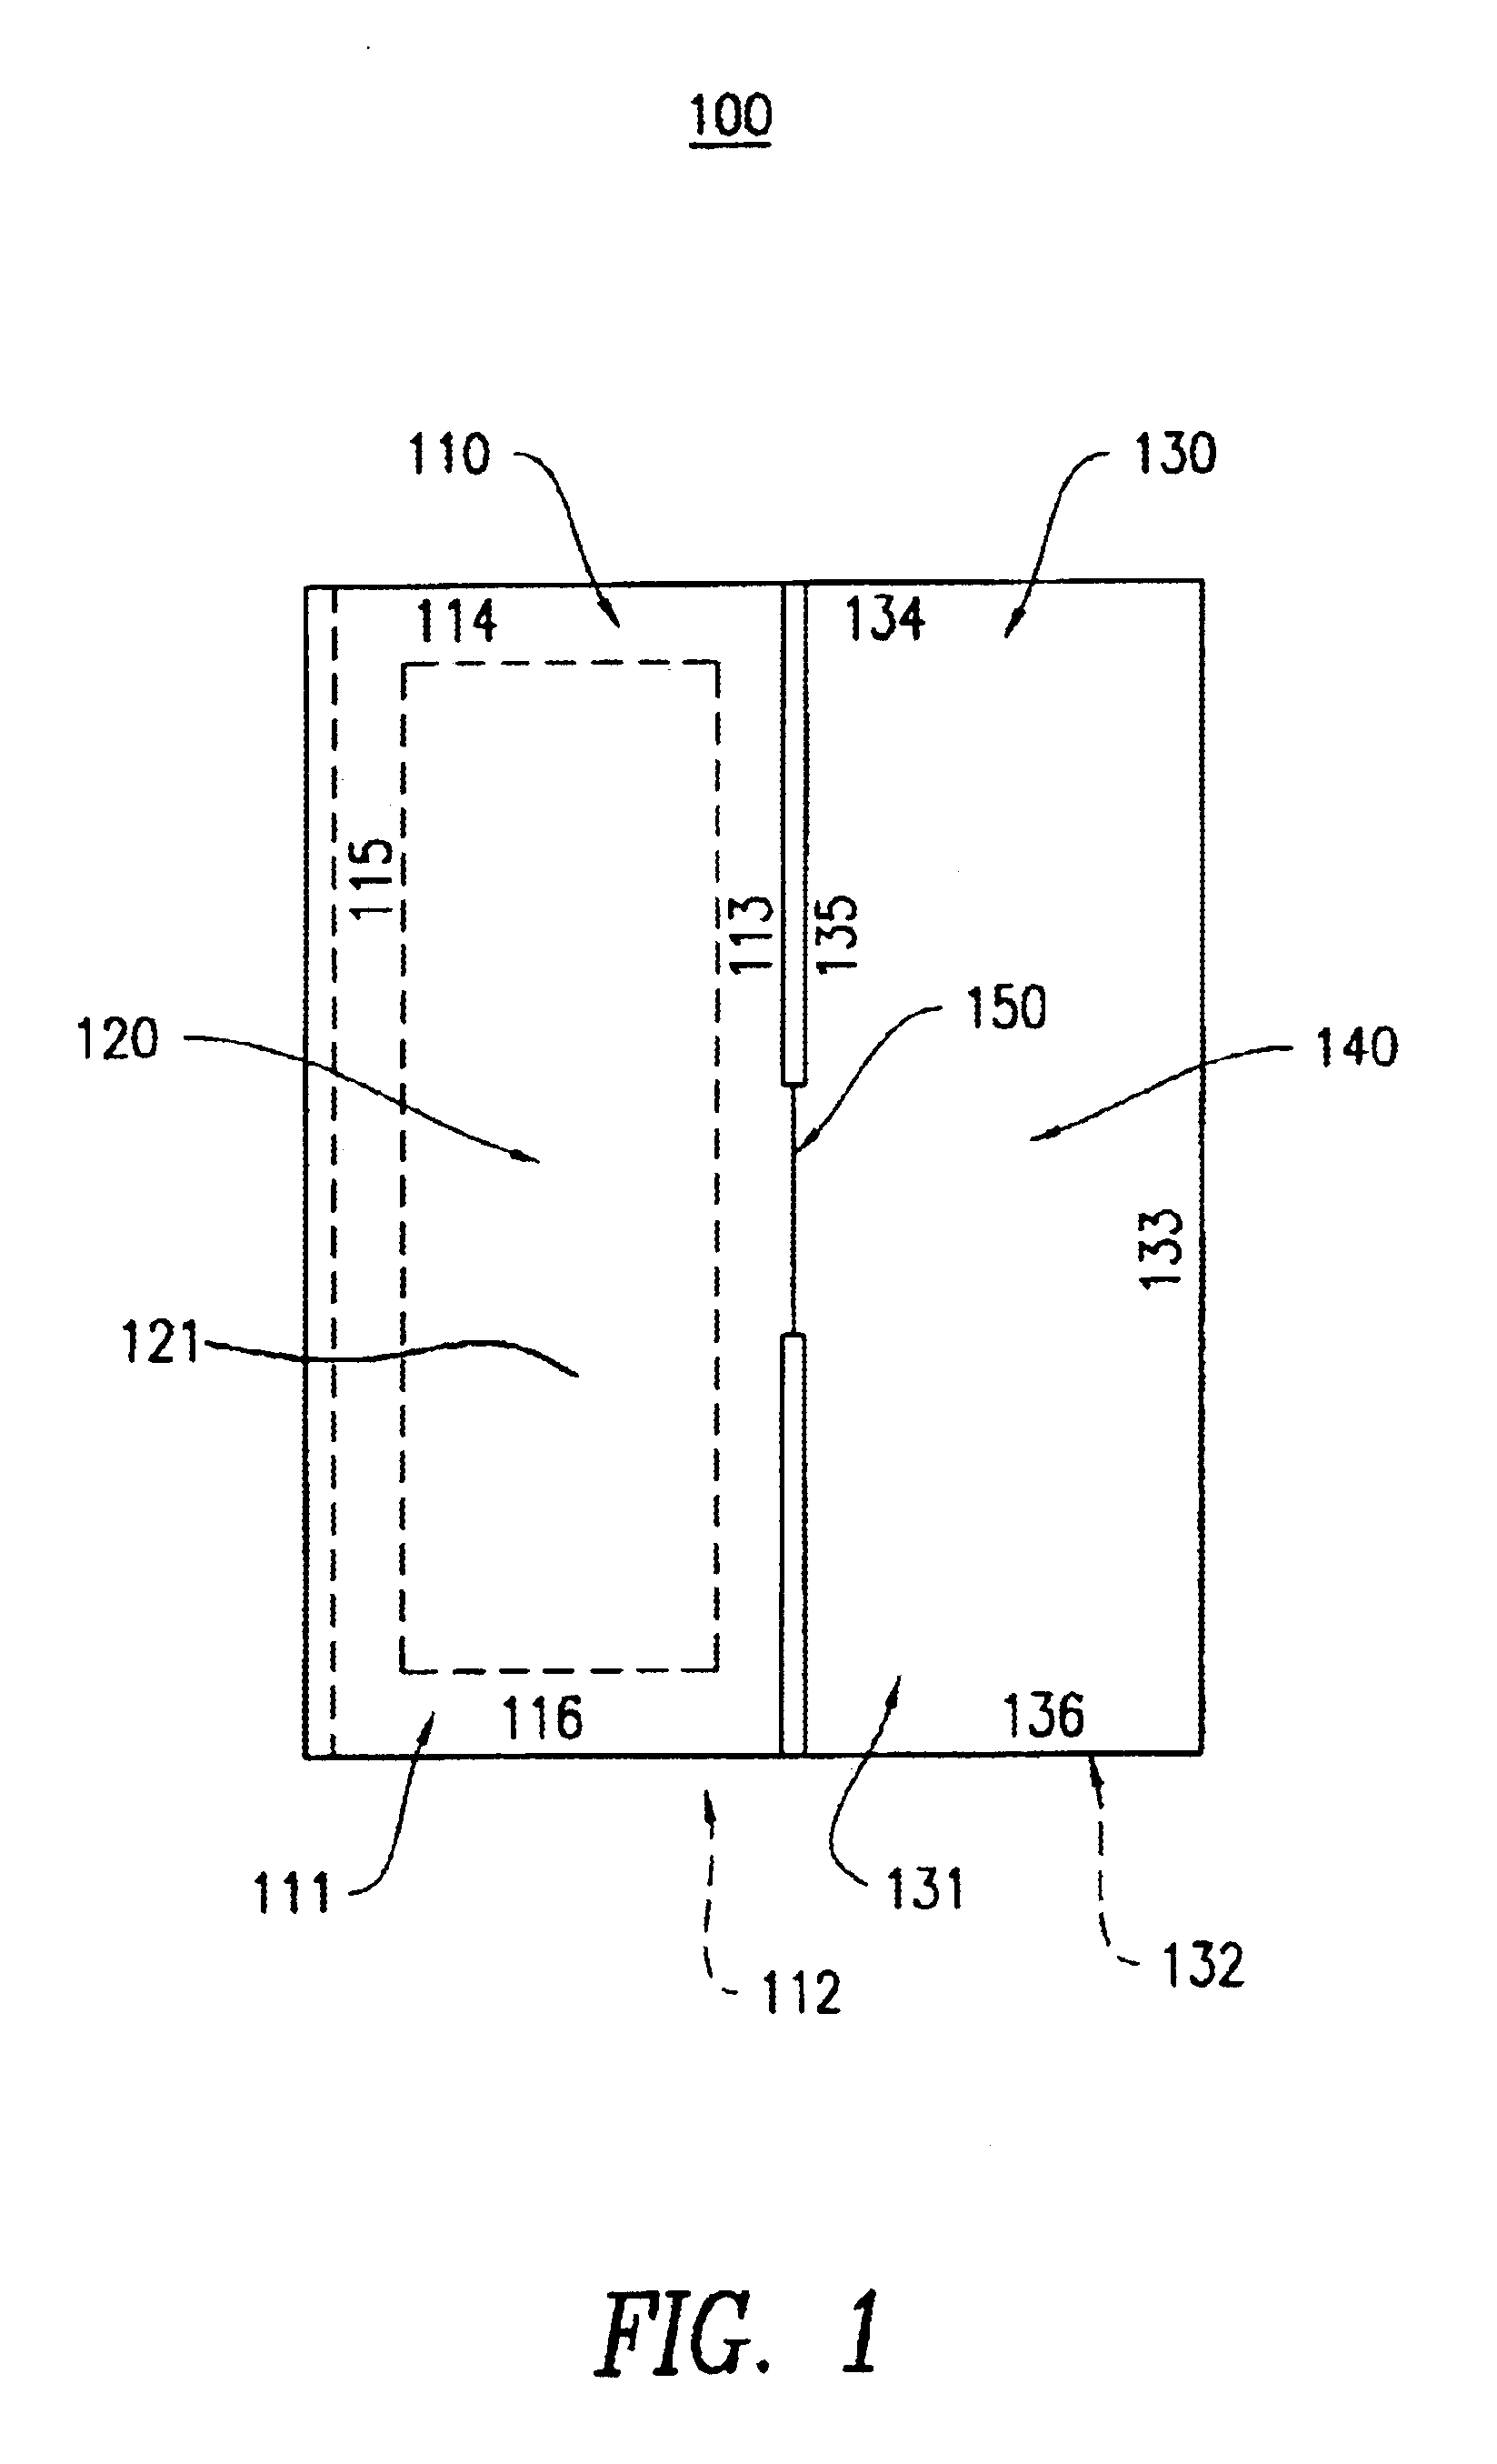 Compartmentalized storage system for temporarily storing and subsequently mixing at least two different substances